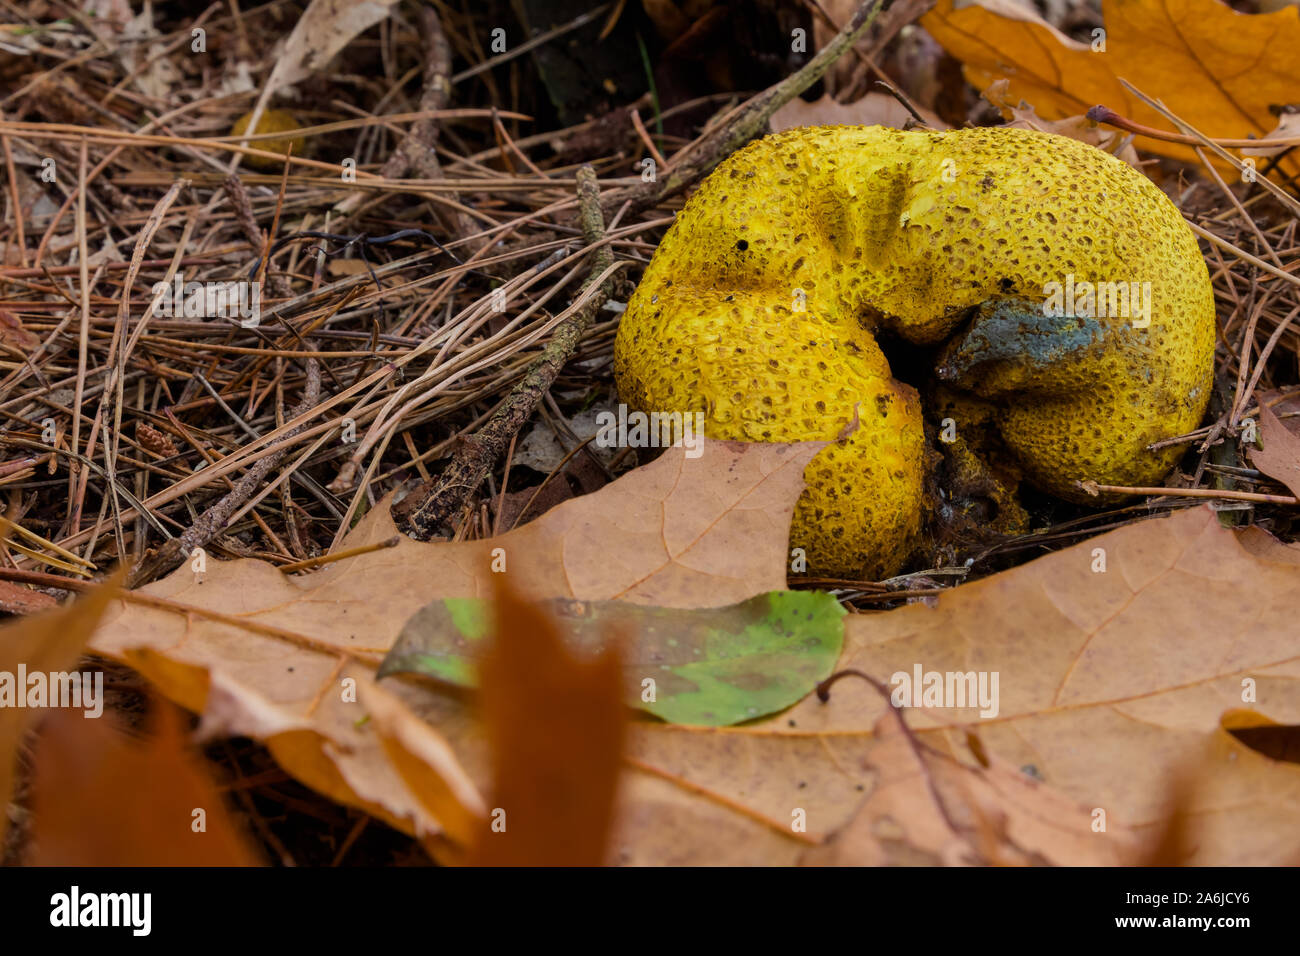 Yellow colored Fuligo septica or dog vomit slime mold, it is supposed to be edible and sometimes eaten in Mexico; said to be scrambled like eggs. Stock Photo